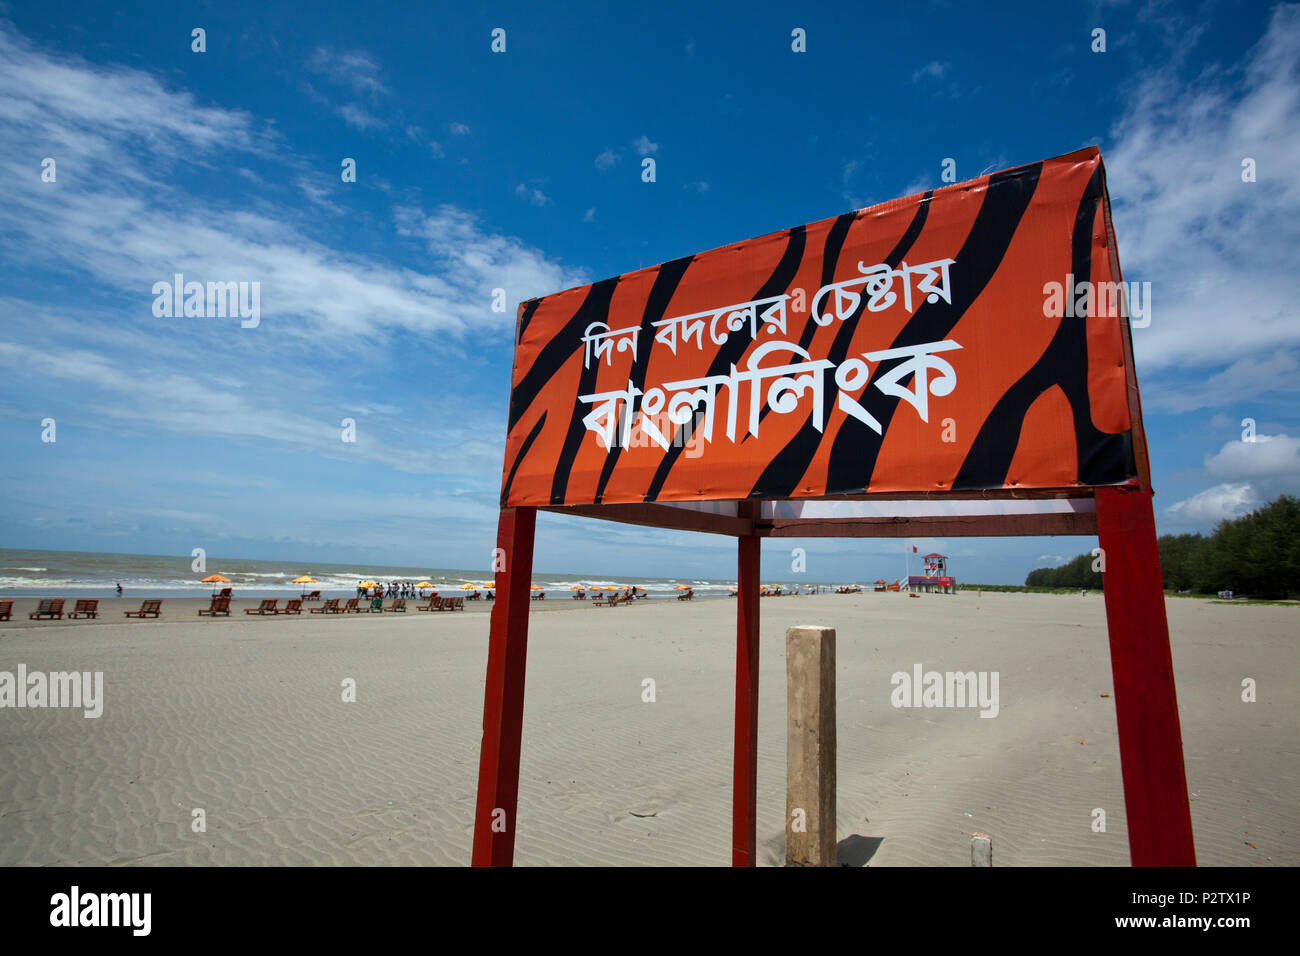 Campaign of a mobile phone operator on the Cox’s Bazar Sea Beach, the longest sea beach in the world. Cox’s Bazar, Chittagong, Bangladesh. Stock Photo